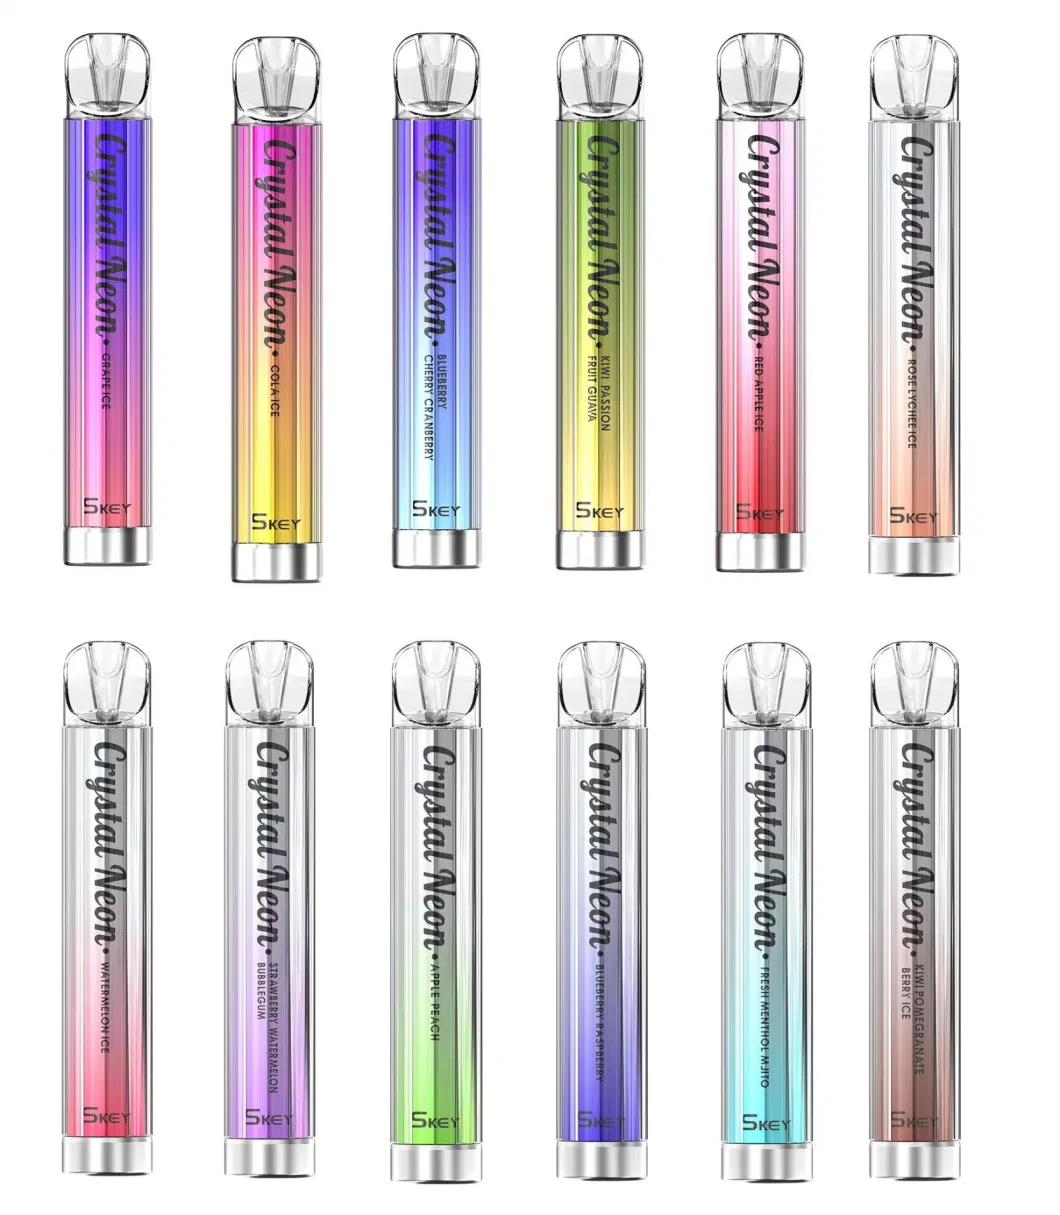 UK Wholesale Tpd Compliant Crystal Bar 600 Puffs Skey Crystal Neon 600 Puffs Disposable Vape Device